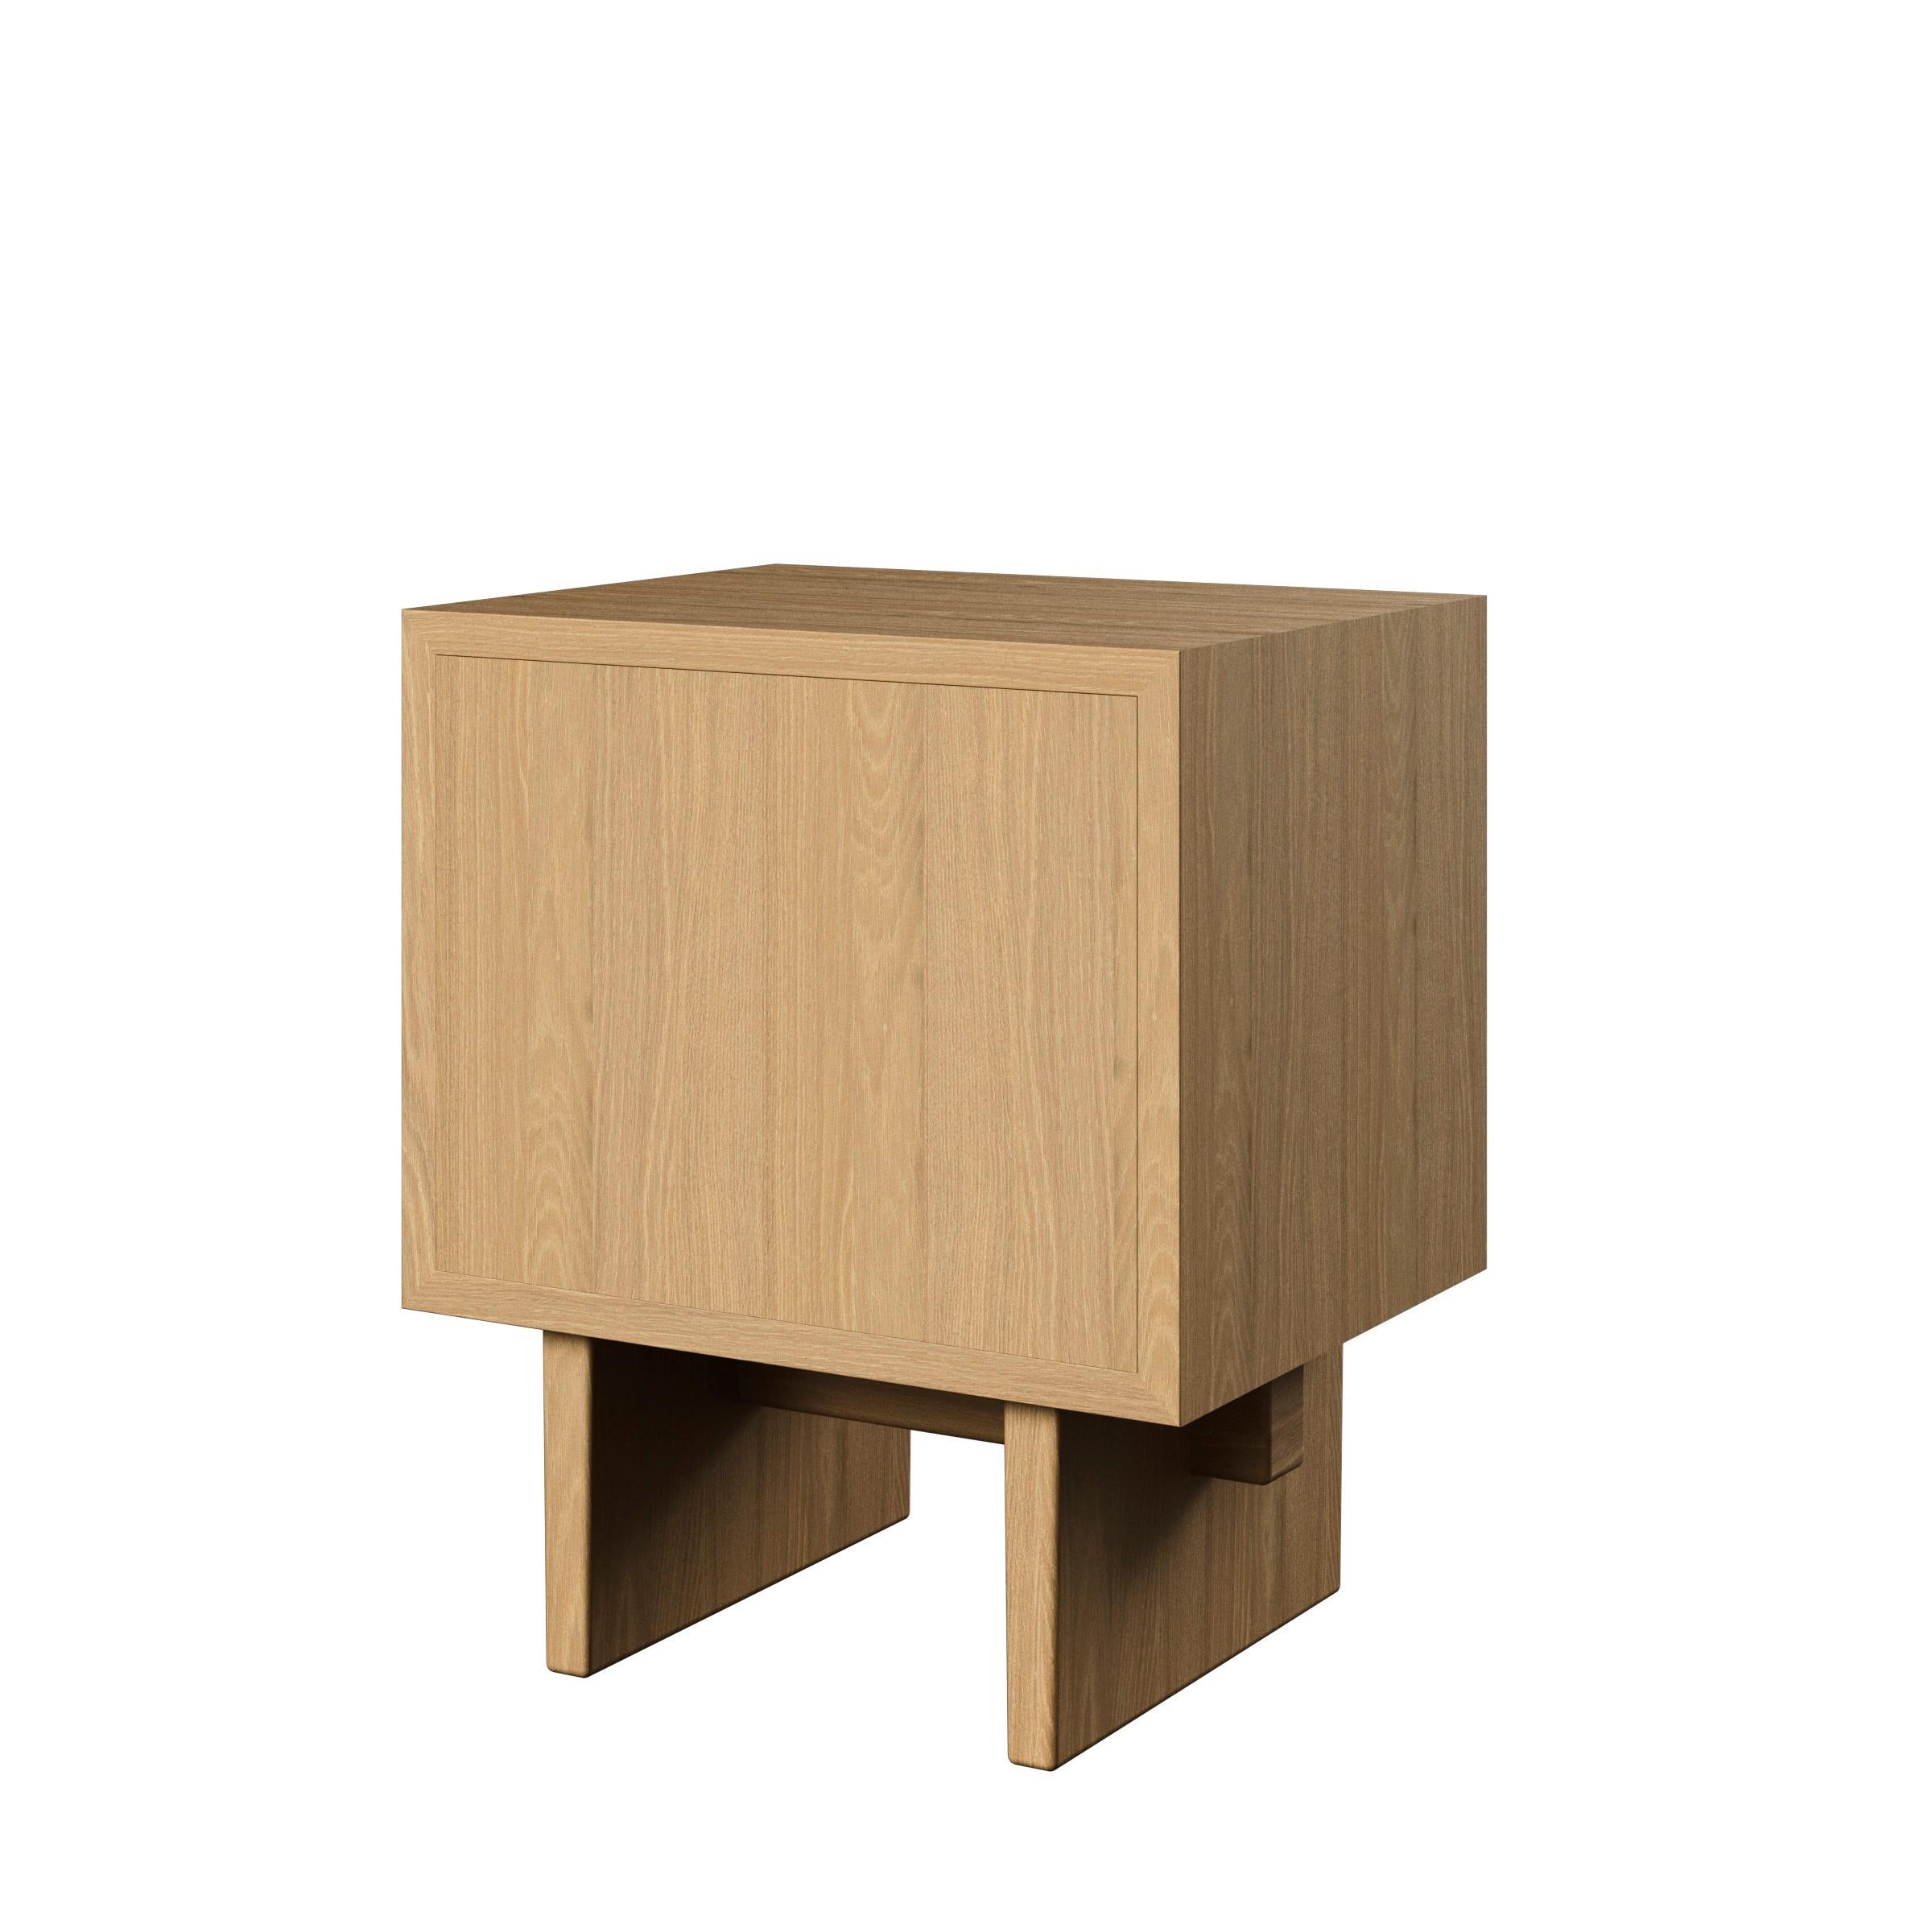 Danish 21st Century, Private Collection Light Oak Nightstand Table by Space Cophenhagen